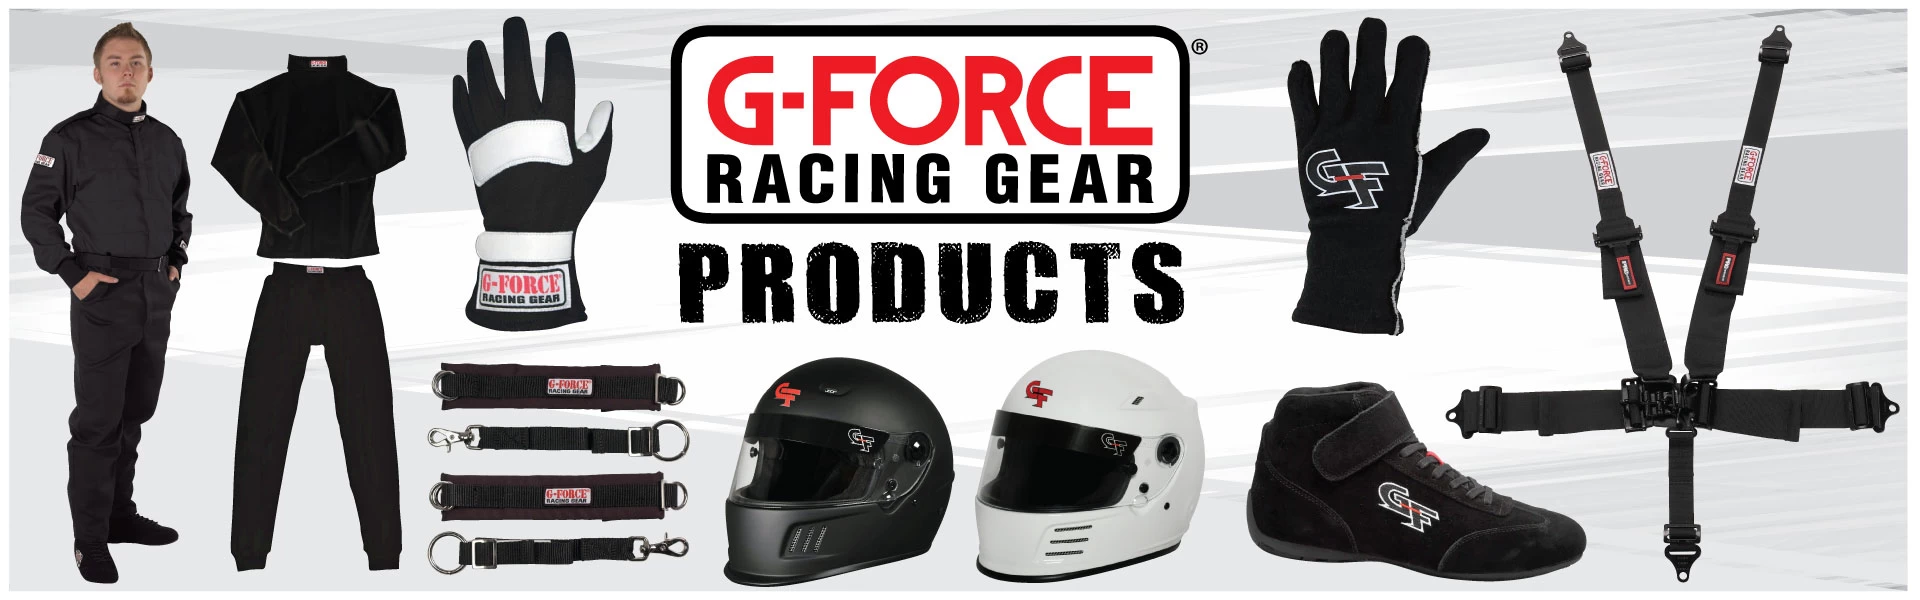 G-Force Racing Gear driving apparel and harnesses available at Day Motor Sports.